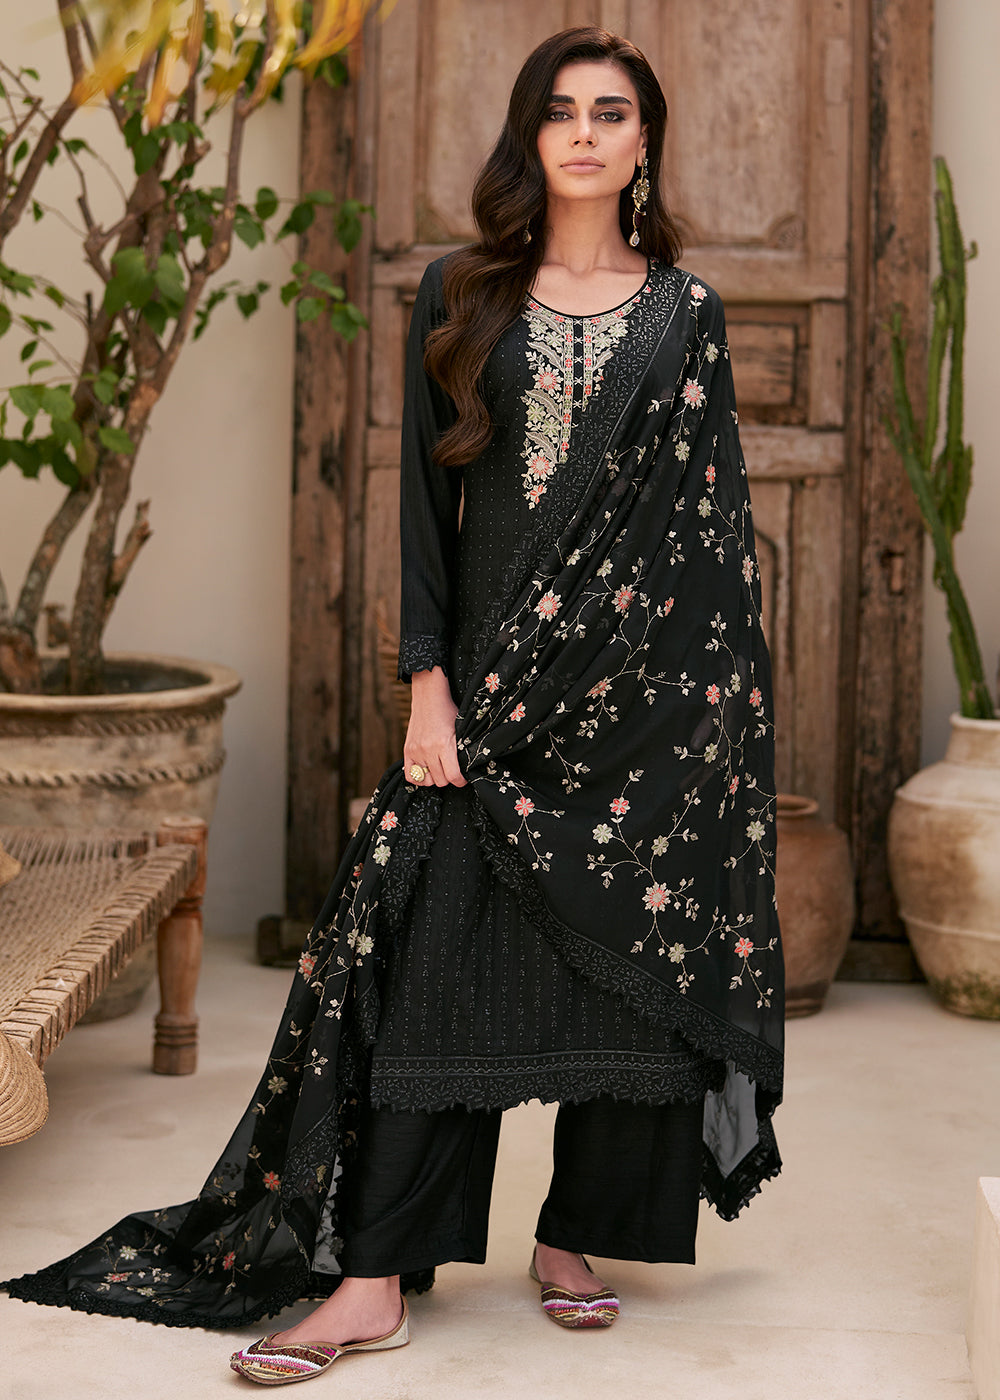 Buy Now Embroidered Black Dola Silk Festive Style Salwar Suit Online in USA, UK, Canada, Germany, Australia & Worldwide at Empress Clothing.